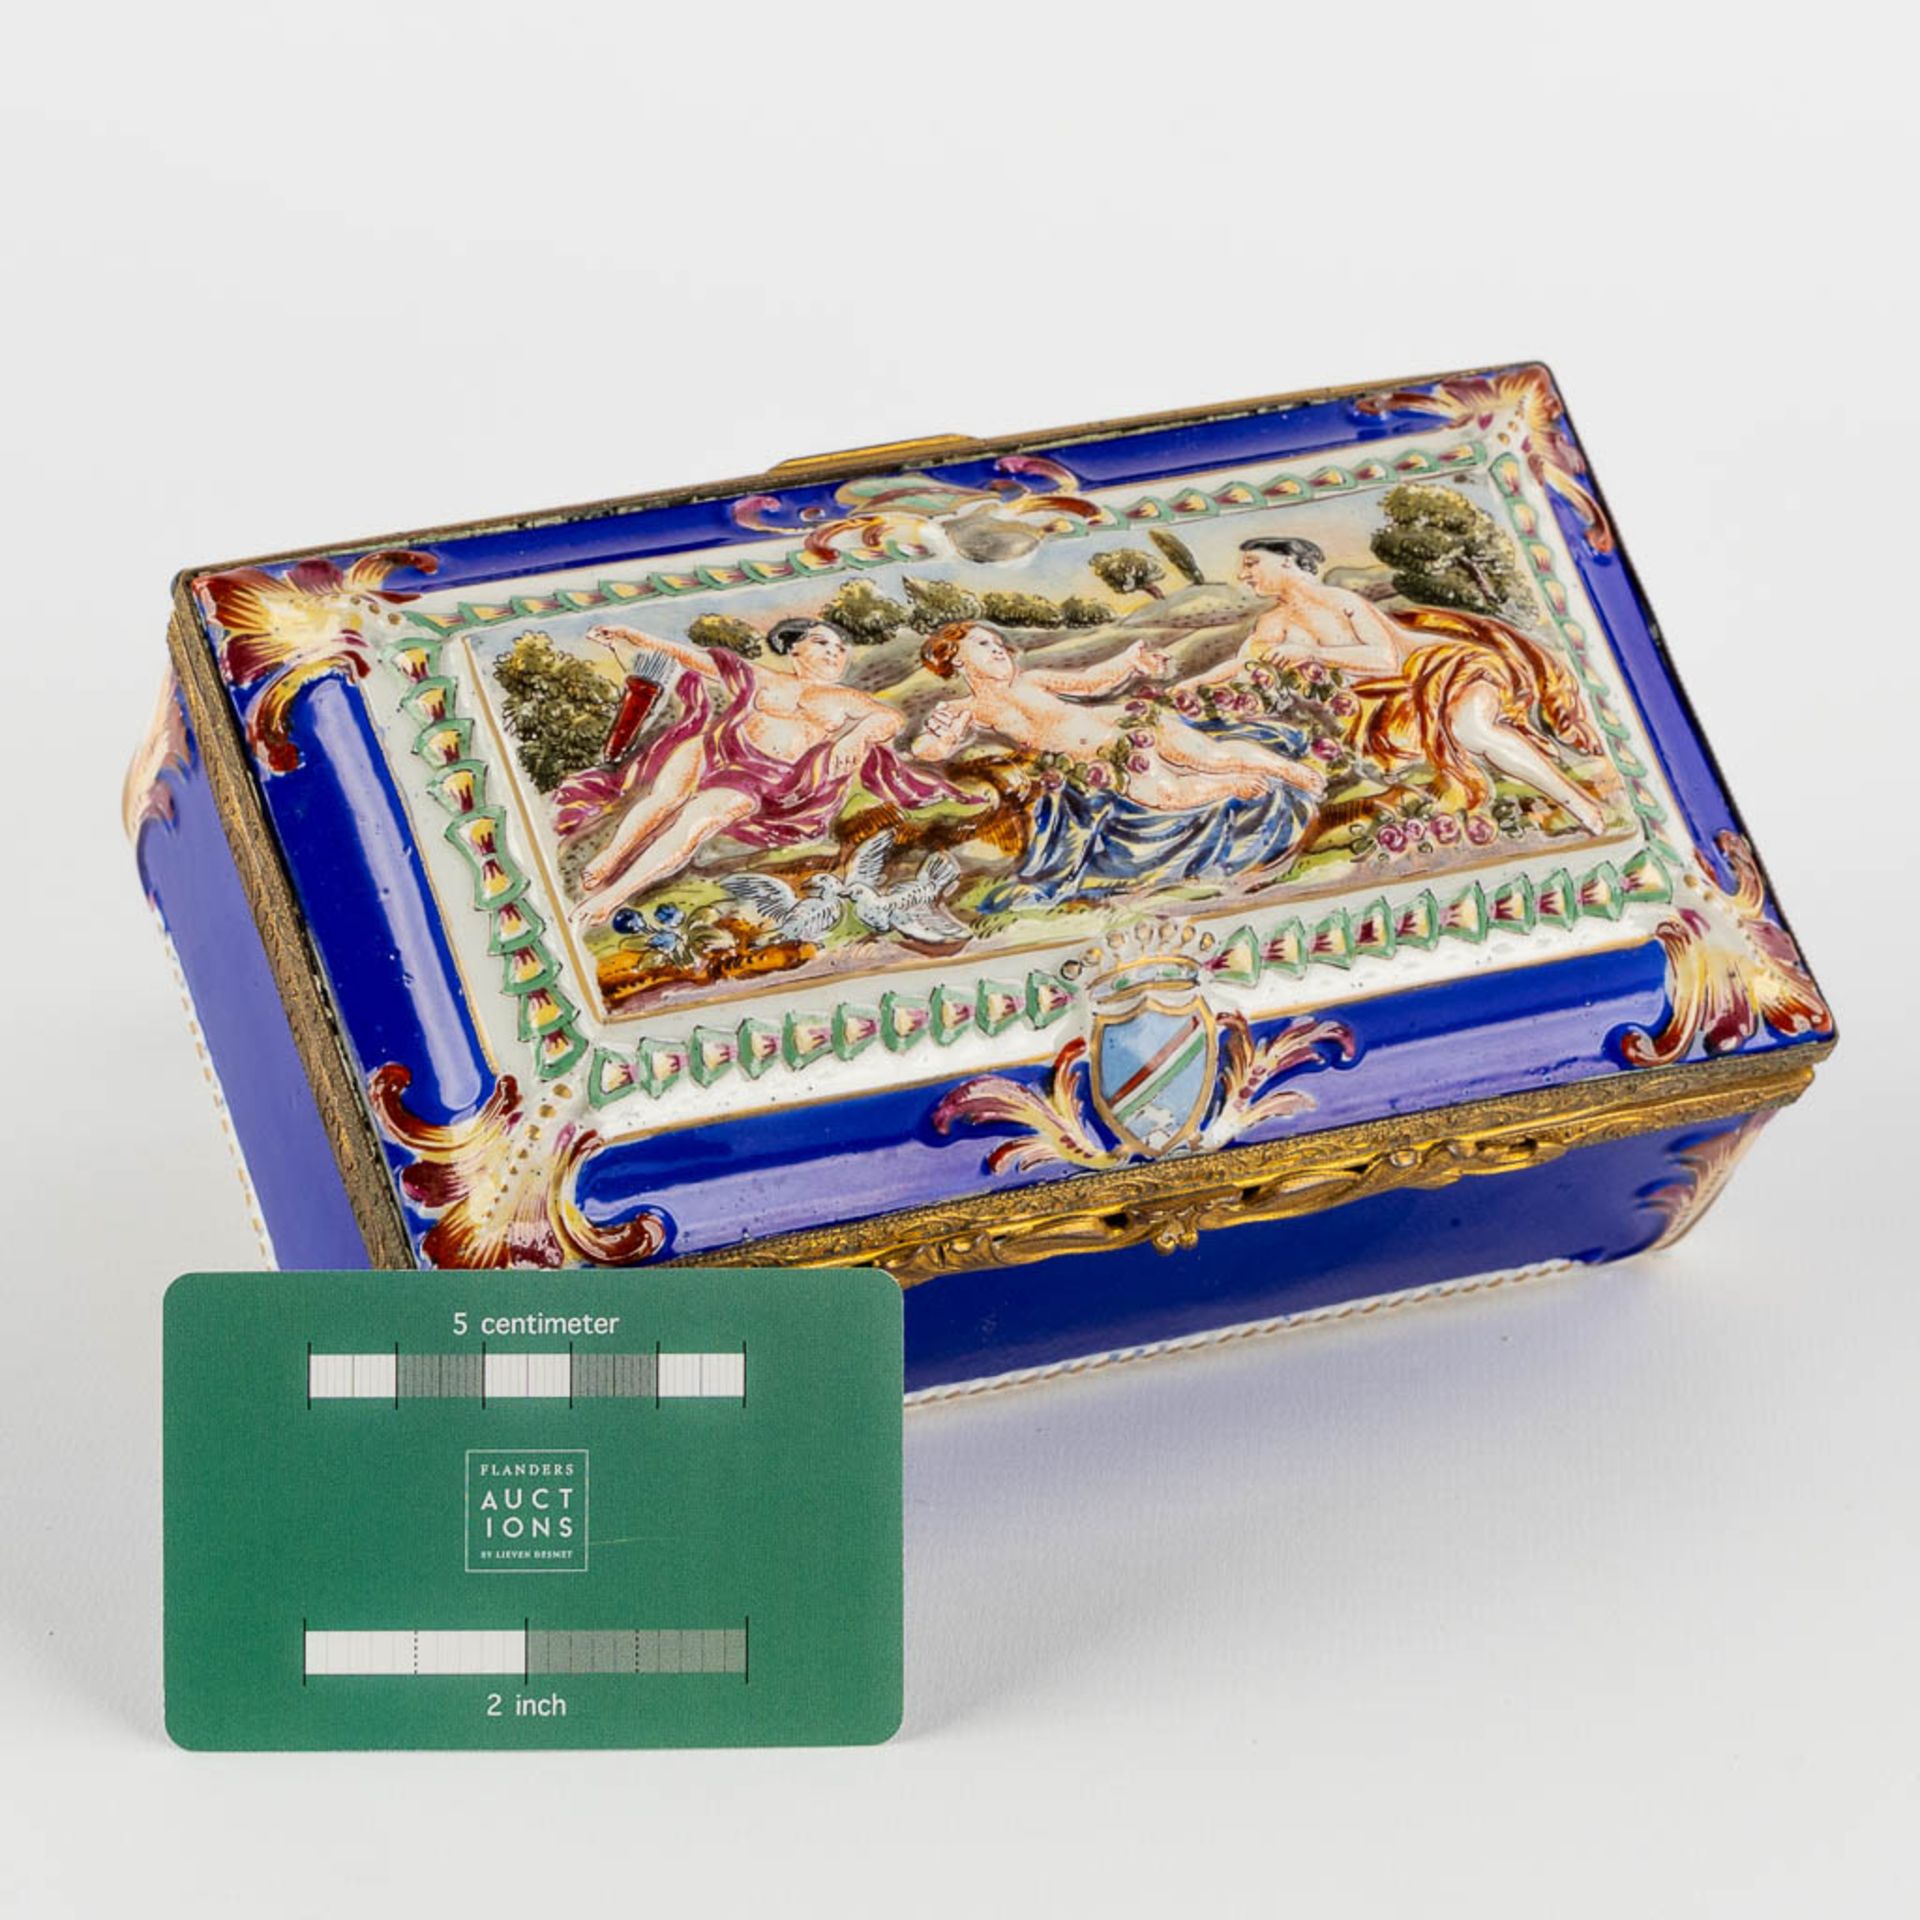 Capodimonte, a finely made porcelain jewellery box. 19th C. (L:10 x W:19 x H:7 cm) - Image 2 of 12